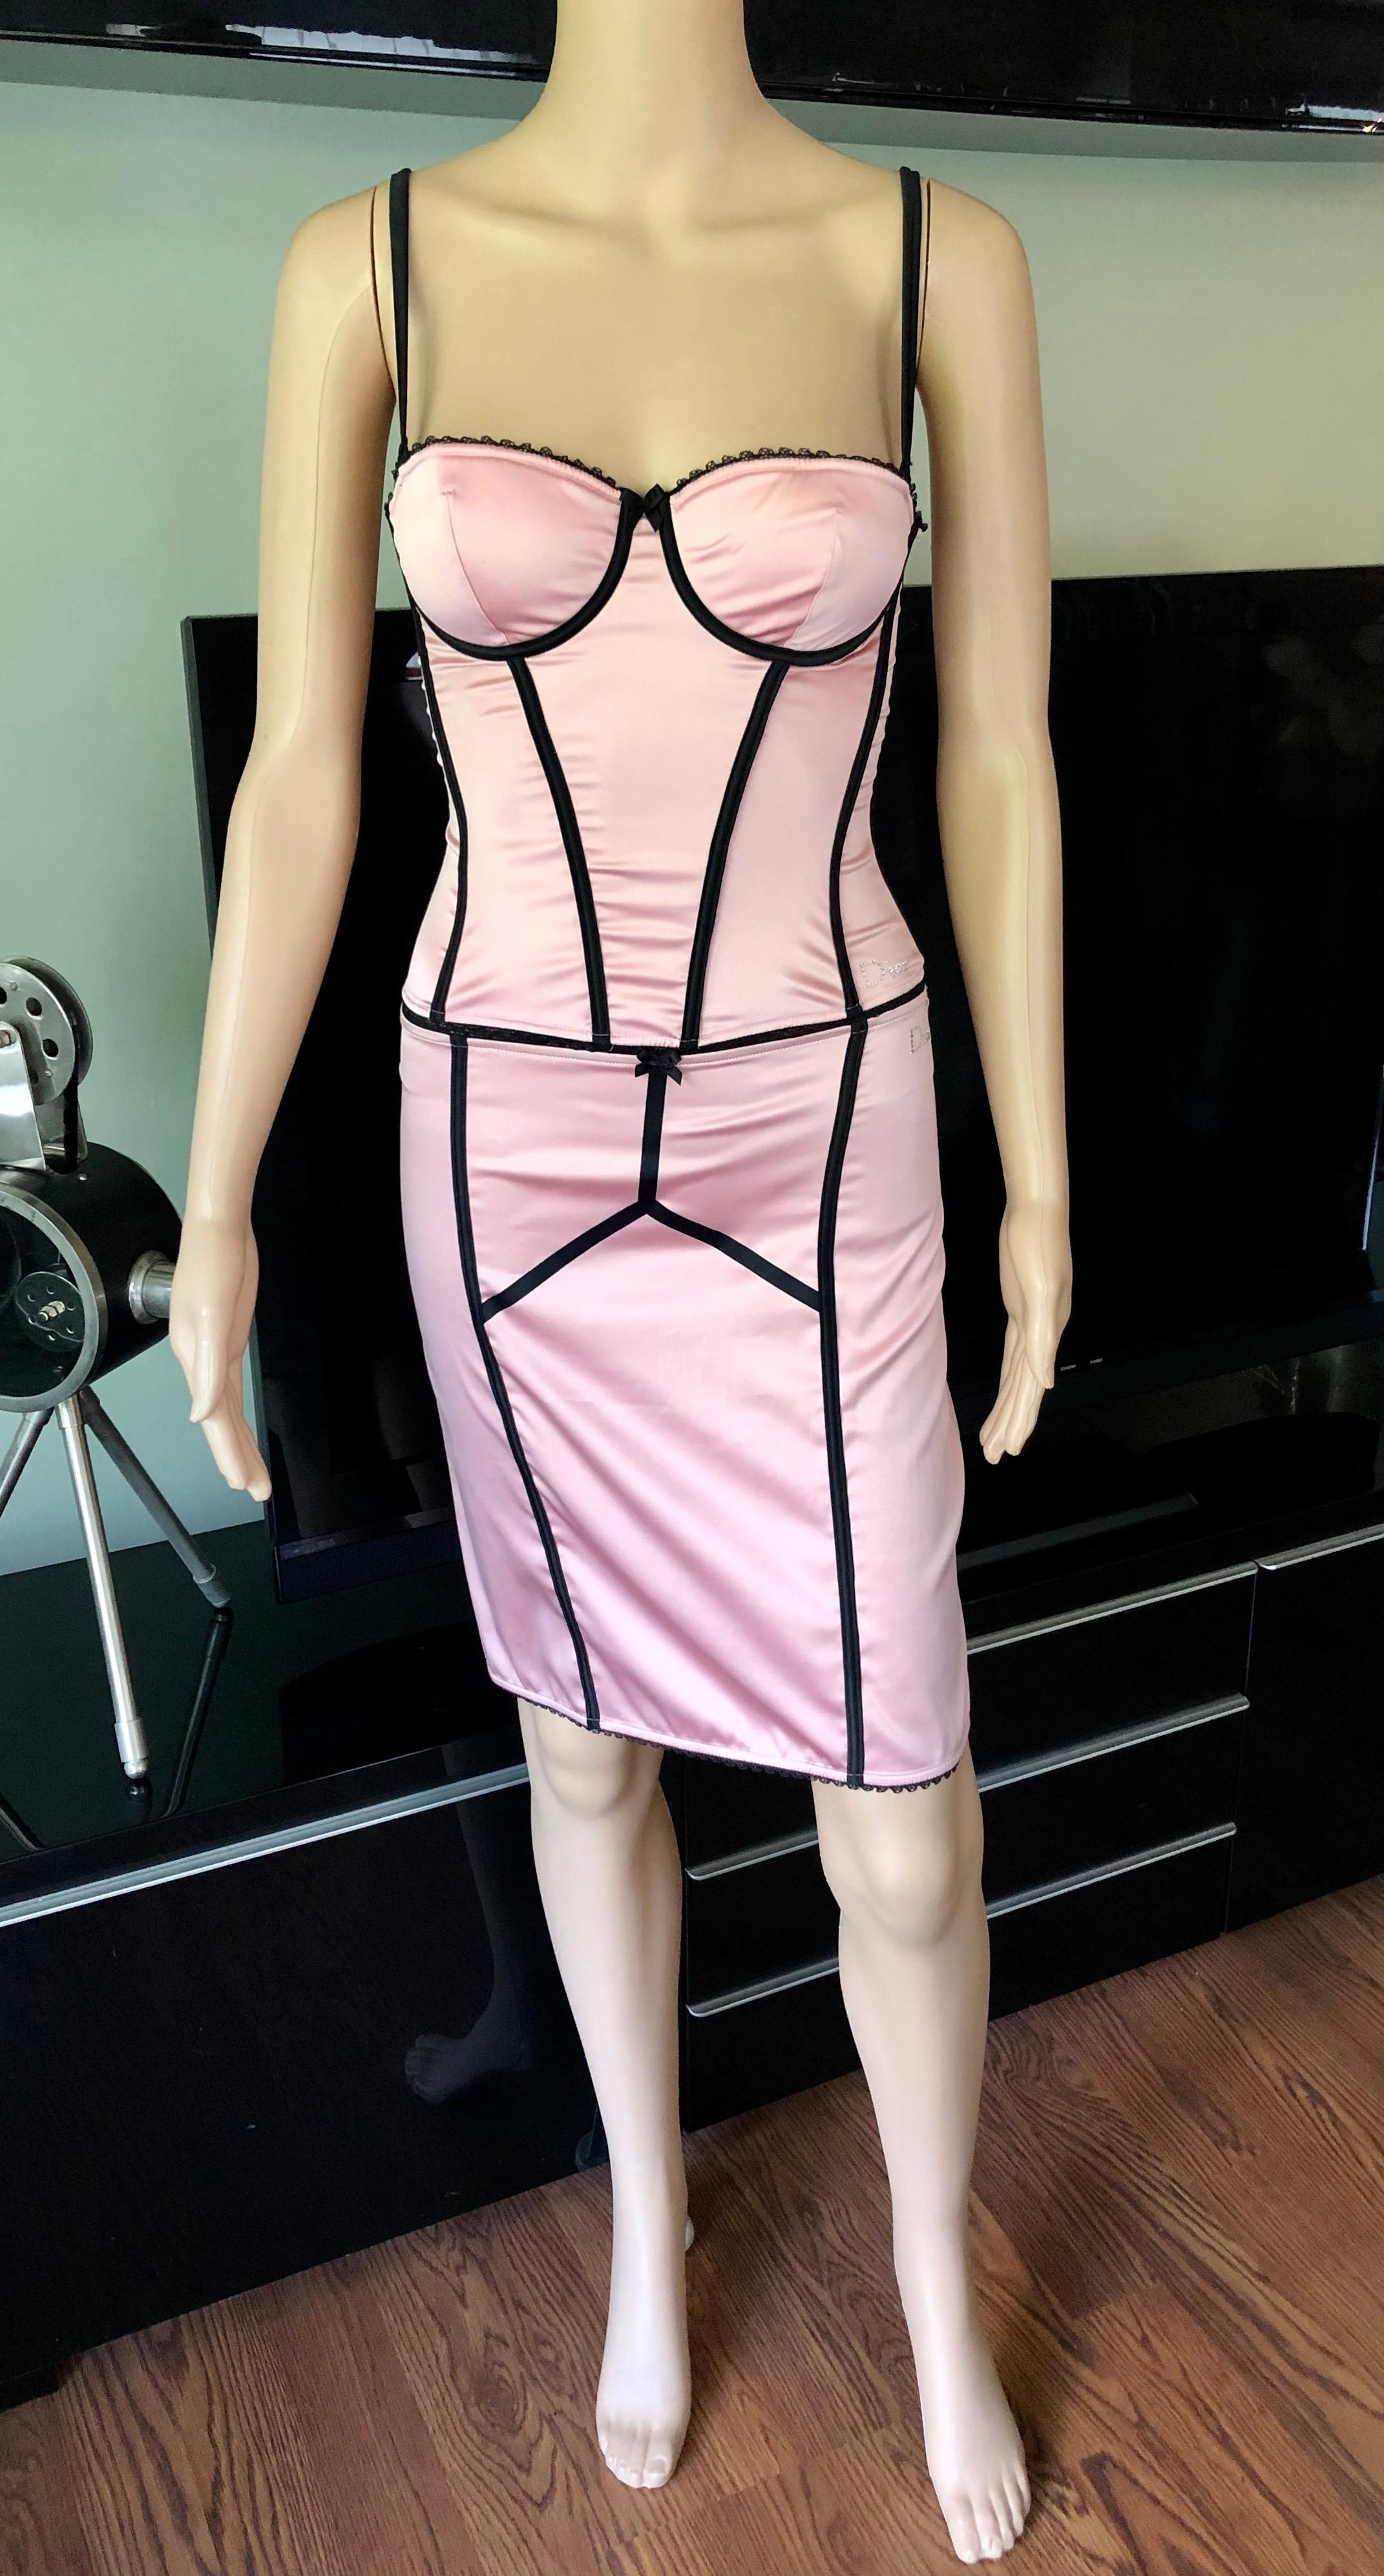 Christian Dior By John Galliano S/S 2002 Unworn Bustier Silk Pink Corset Top & Skirt 2 Piece Set FR 36

Christian Dior by John Galliano silk bustier top featuring crystal embellished logo, detachable straps, padded bust, and hook-and-eye closure.